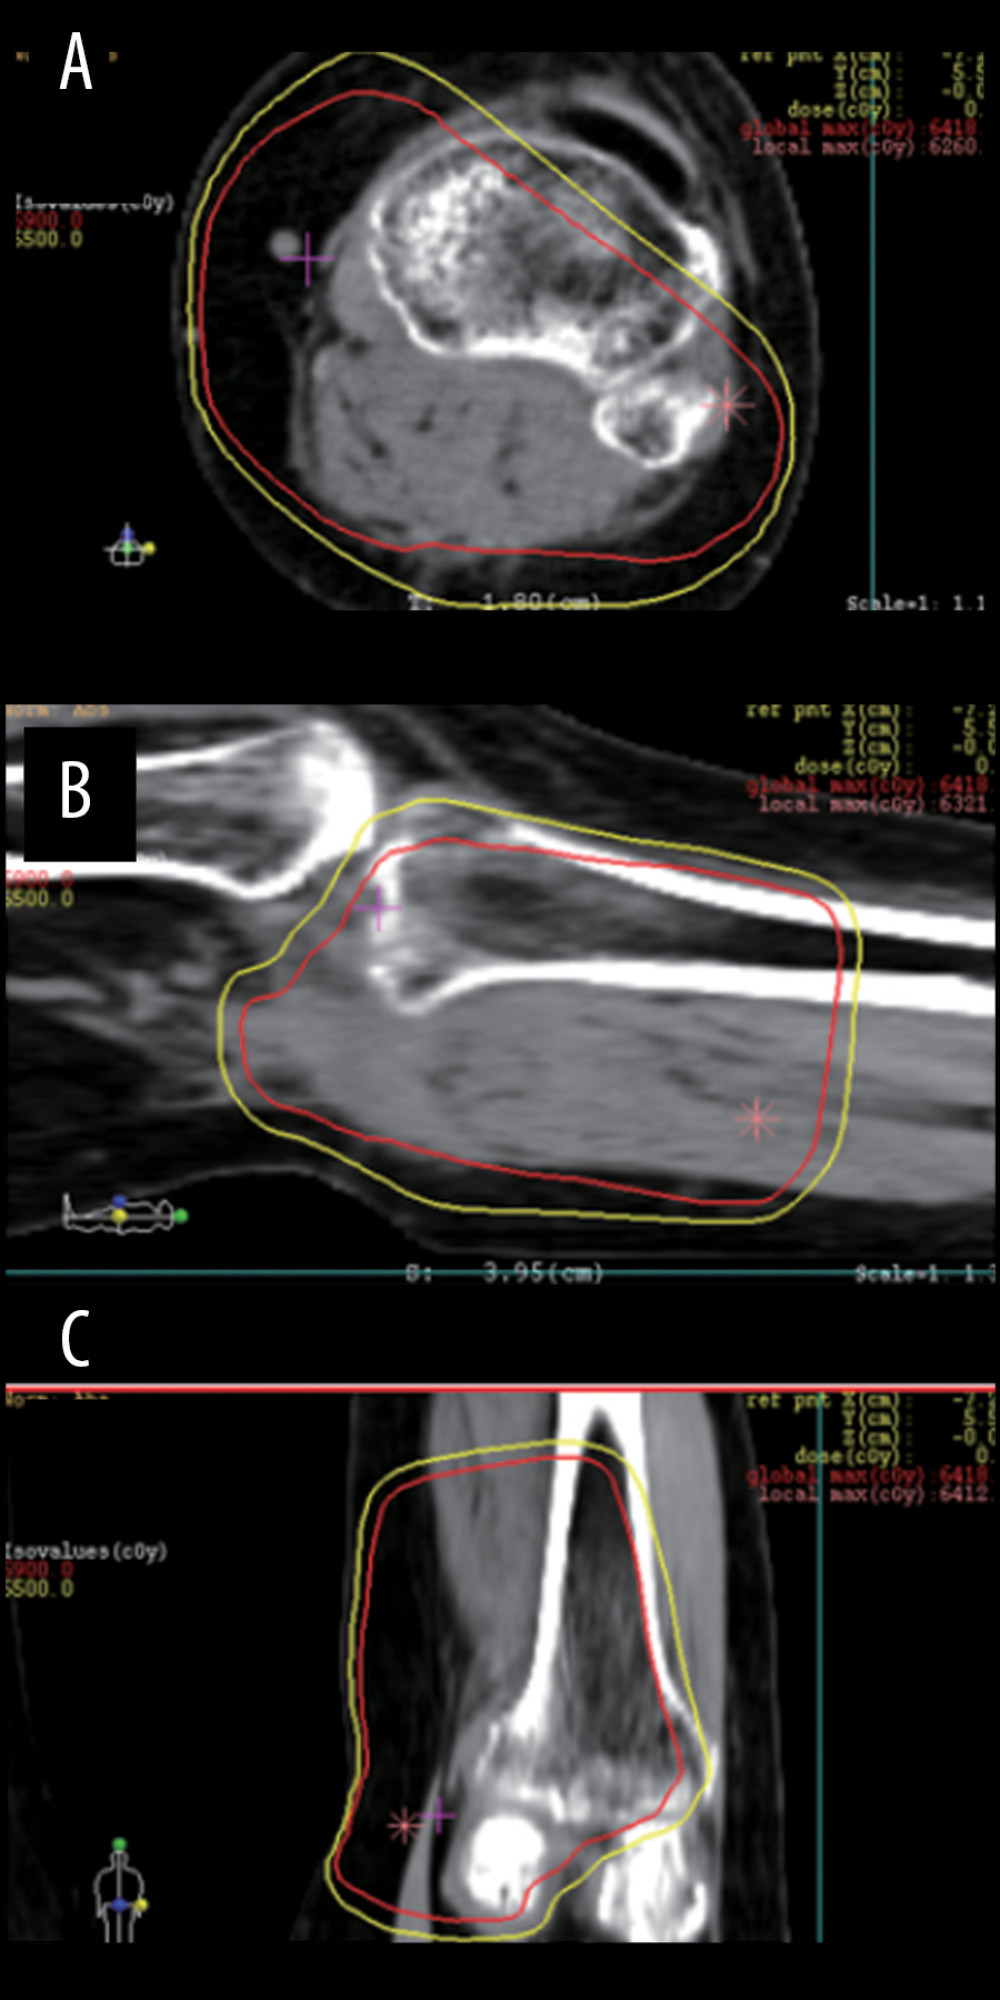 Dose distribution of the radiation therapy was shown. Note the dose of 59 Gy was delivered to the posterior segment of the tibia (red line). (A) Axial view, (B) sagittal view, and (C) coronal view.